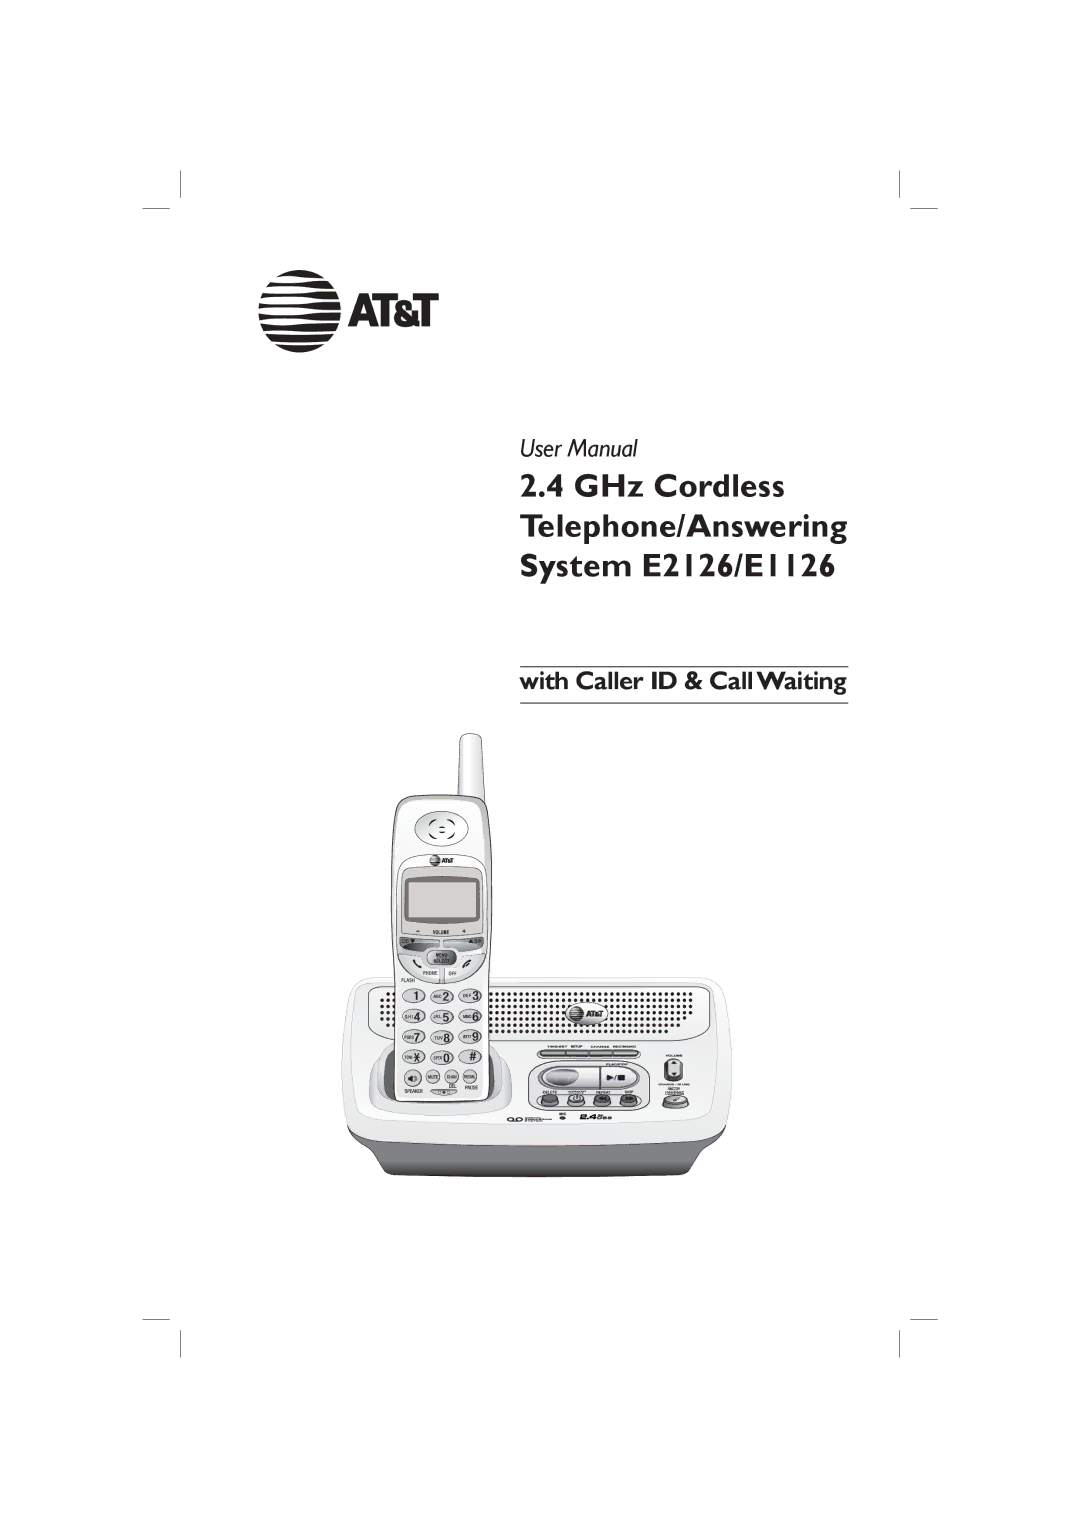 AT&T ME1126 user manual GHz Cordless Telephone/Answering System E2126/E1126 